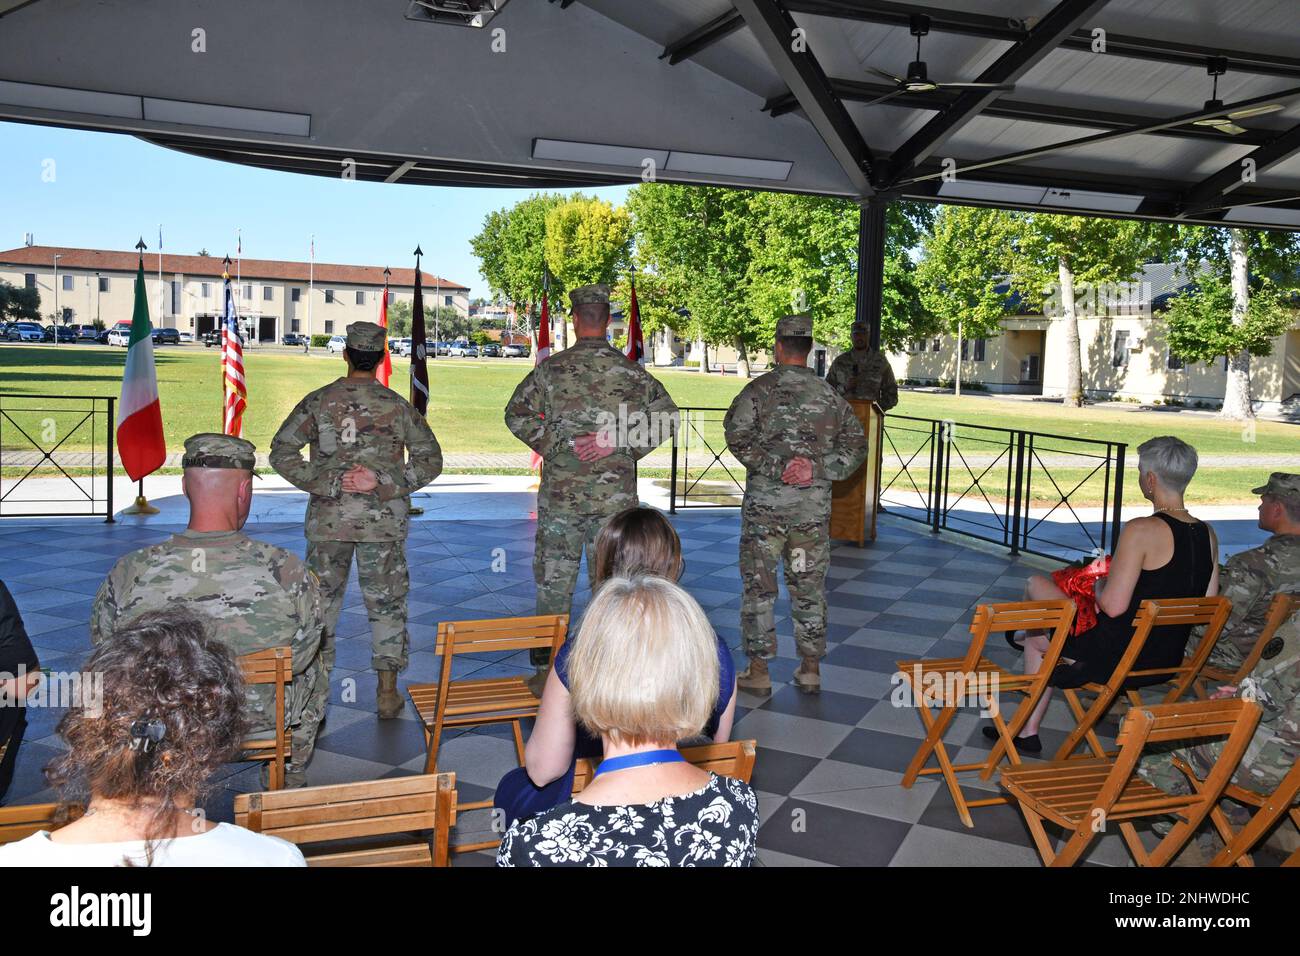 U.S. Army Lt. Col. Brian C. Tripp, the outgoing Commander Public Health Activity - Italy, Col. Kenneth D. Spicer, the commander of Public Health Command Europe, and Lt. Col. Serena T. Mukai, the incoming Commander, during the Change of Command ceremony at Caserma Ederle in Vicenza, Italy, August 3, 2022. Stock Photo